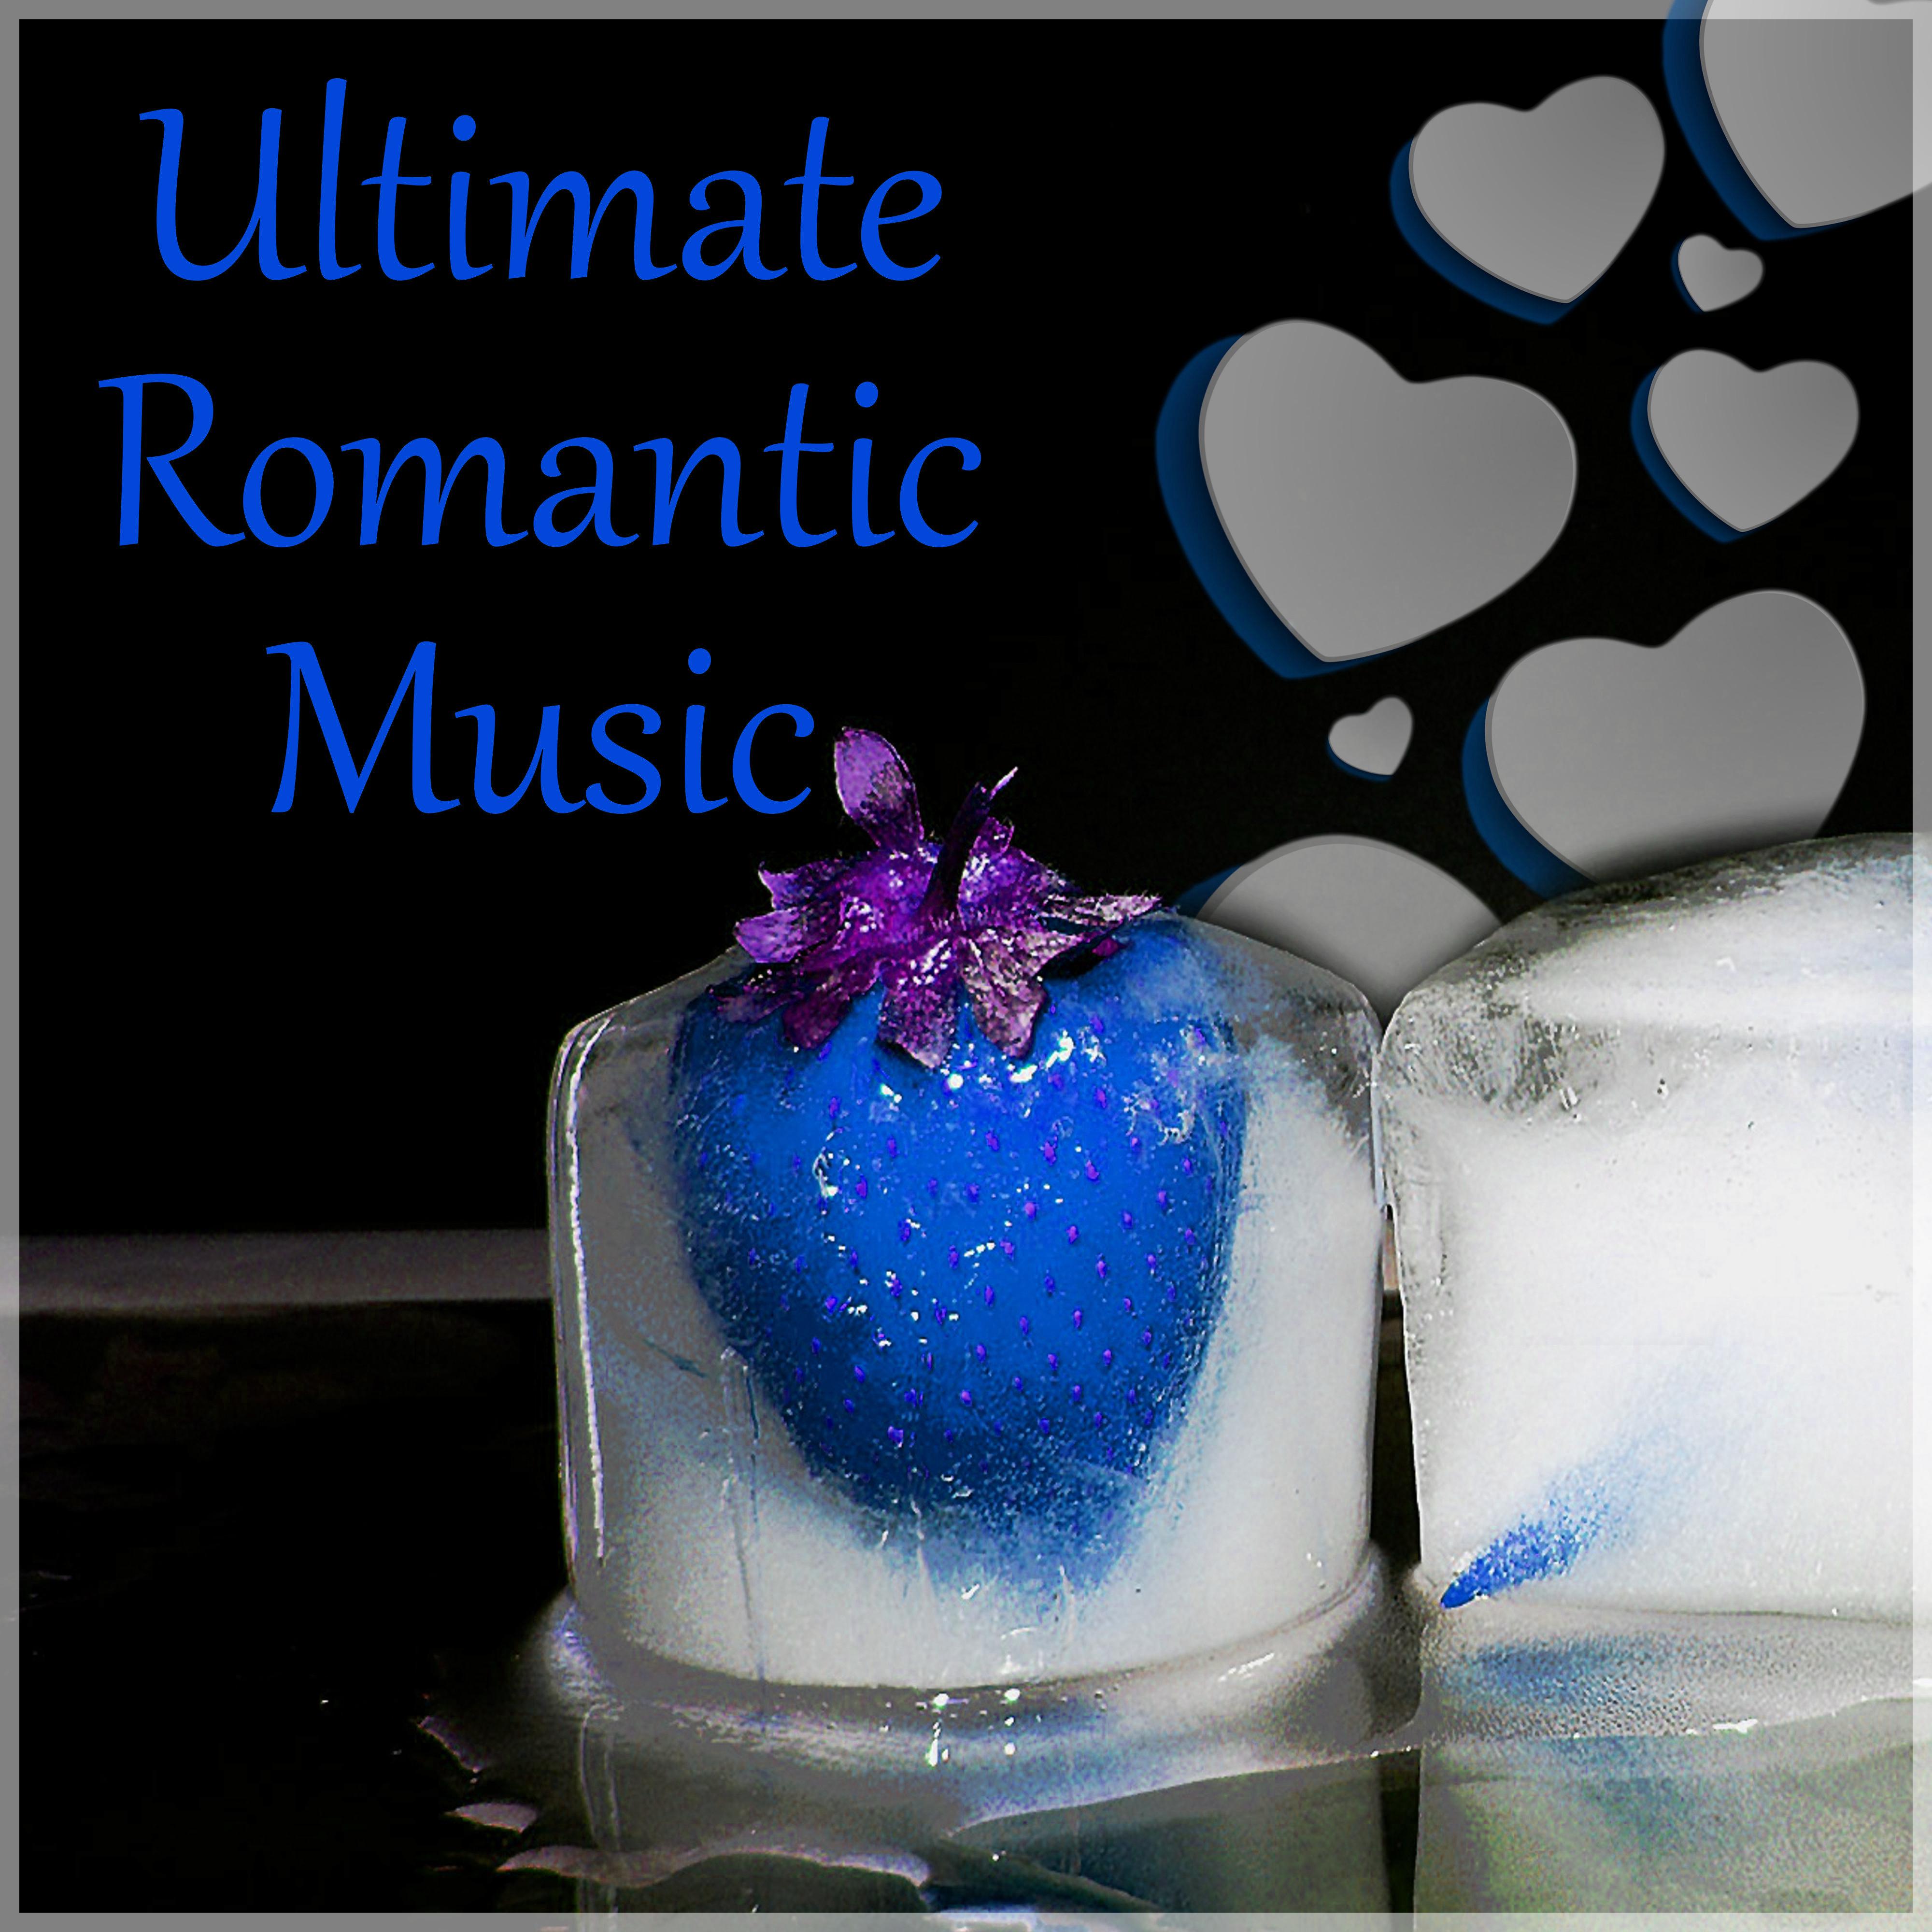 Ultimate Romantic Music – Night Jazz, Soft and Calm Jazz Music, My Love, Most Essential Romantic Jazz, Falling In Love, Candle Light, Dinner for Two